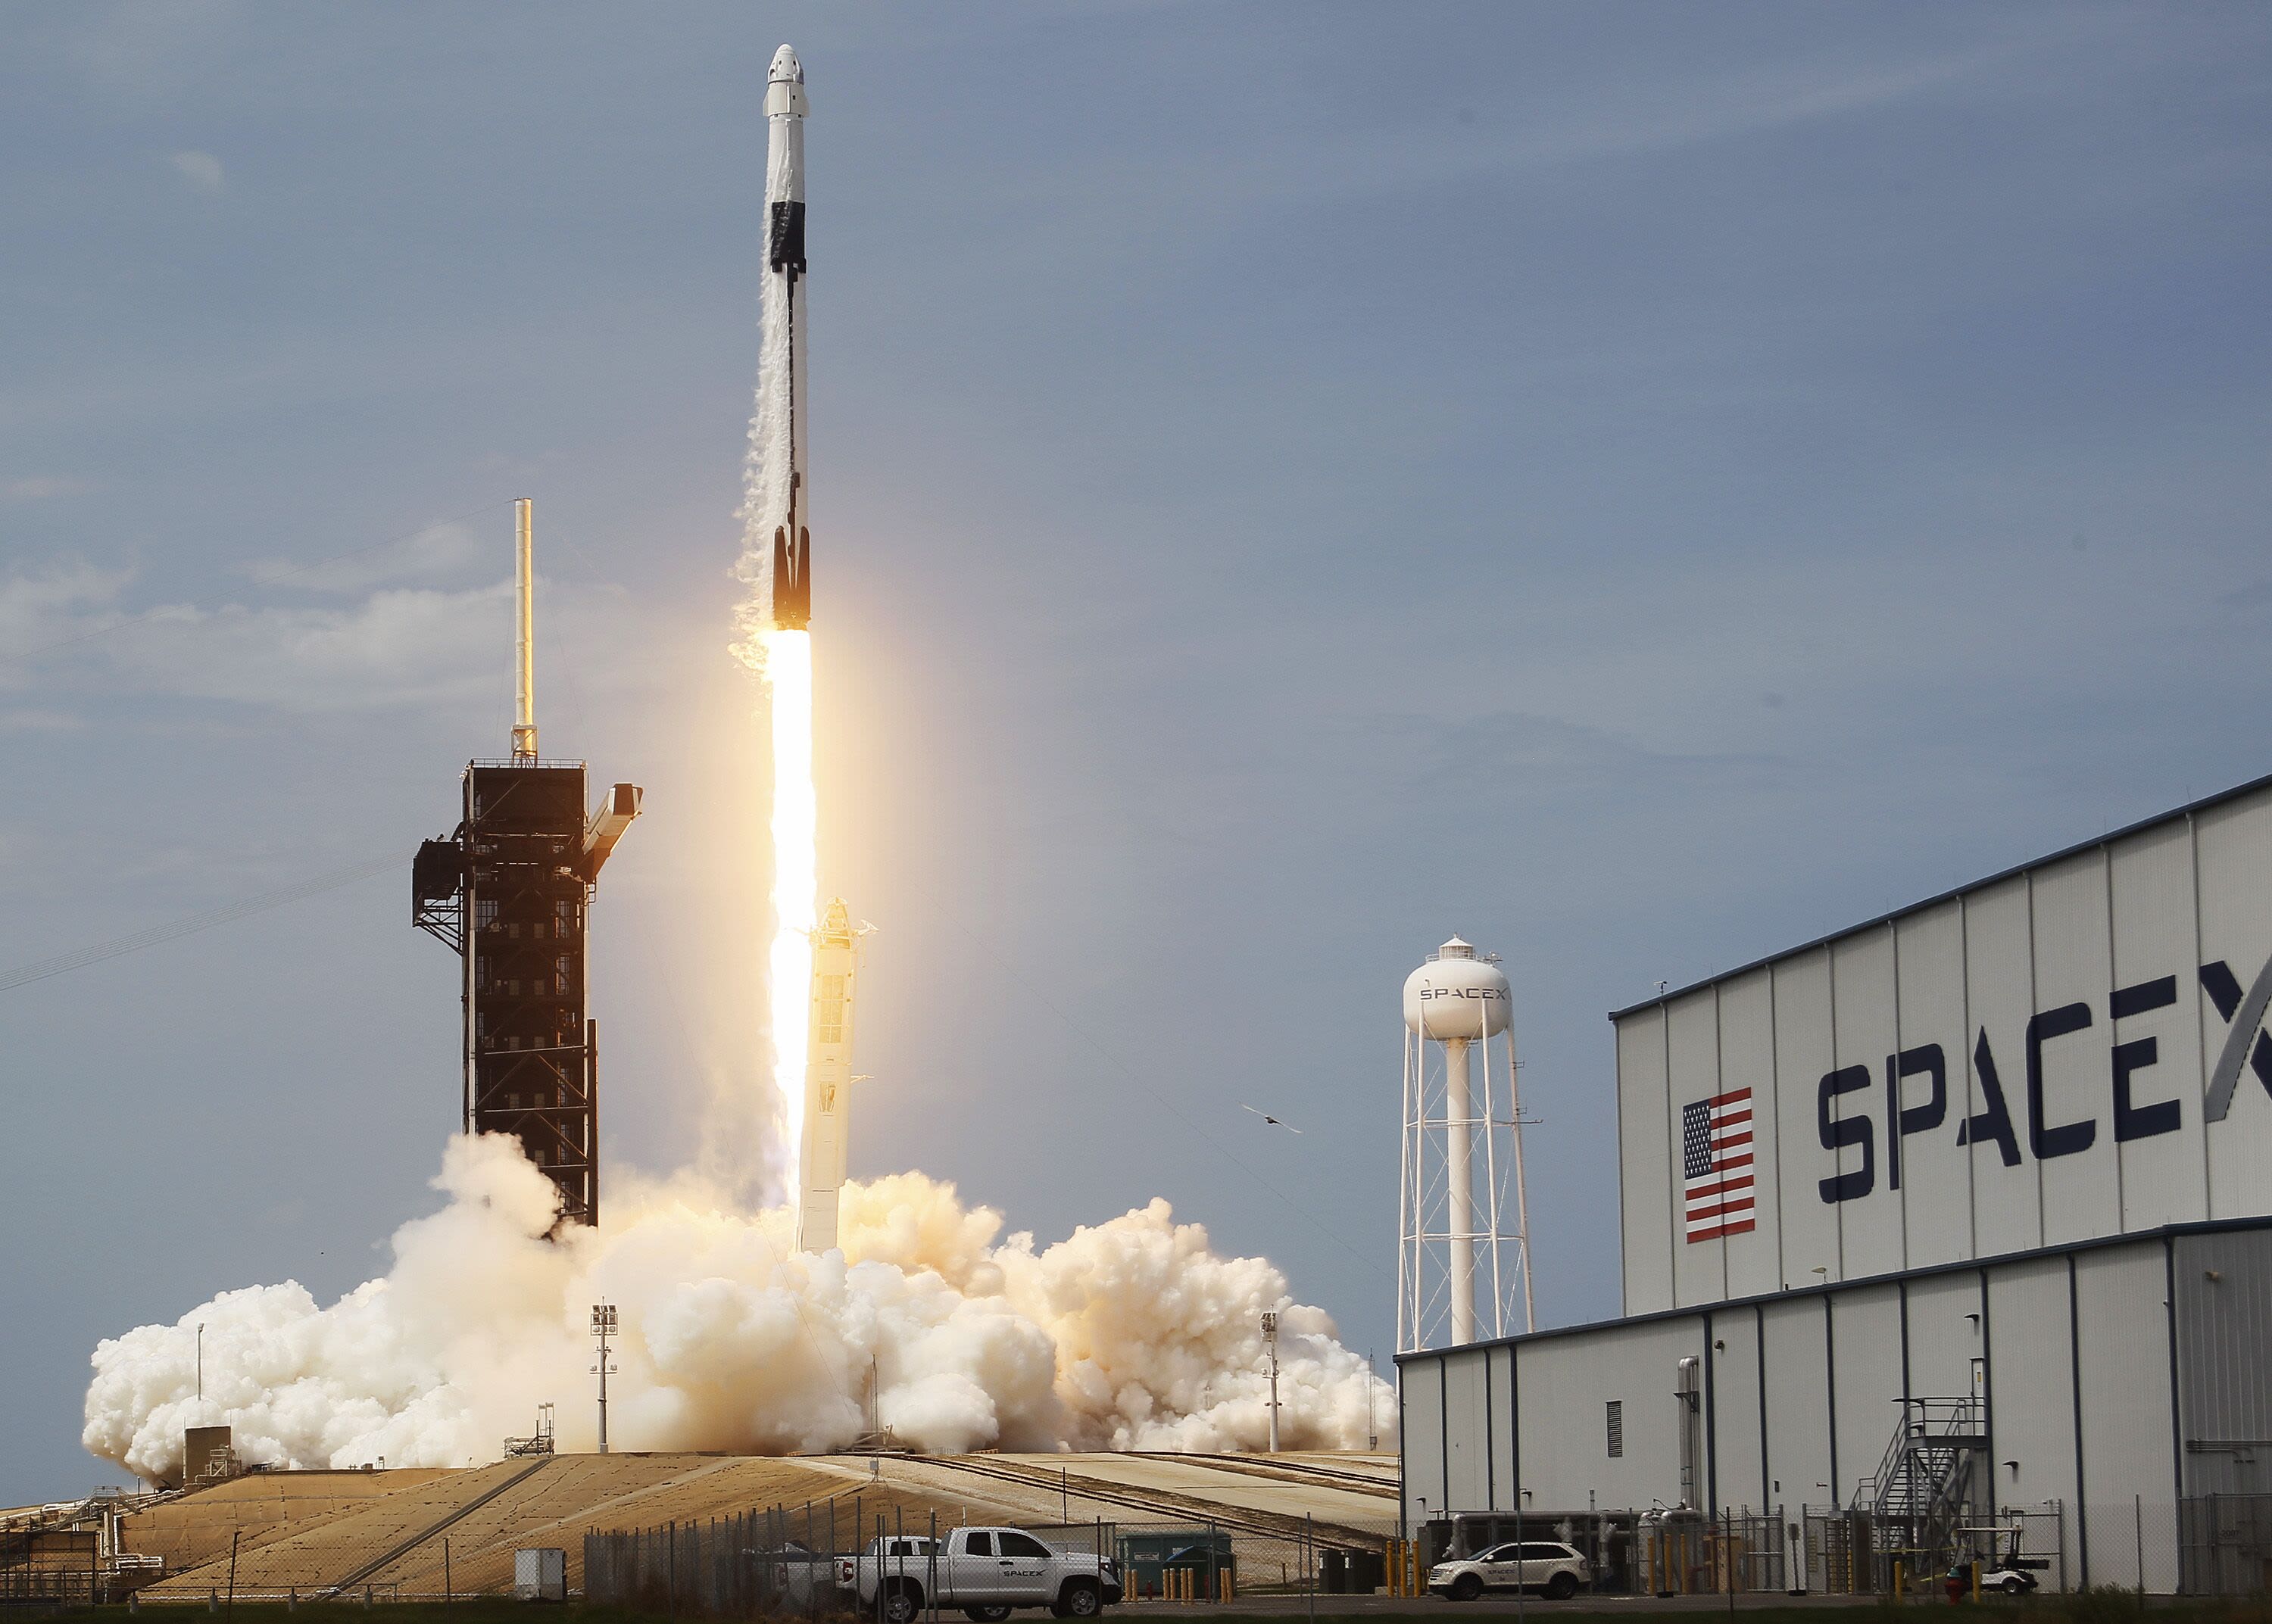 SpaceX Weighs Plan to Sell Shares at $200 Billion Valuation